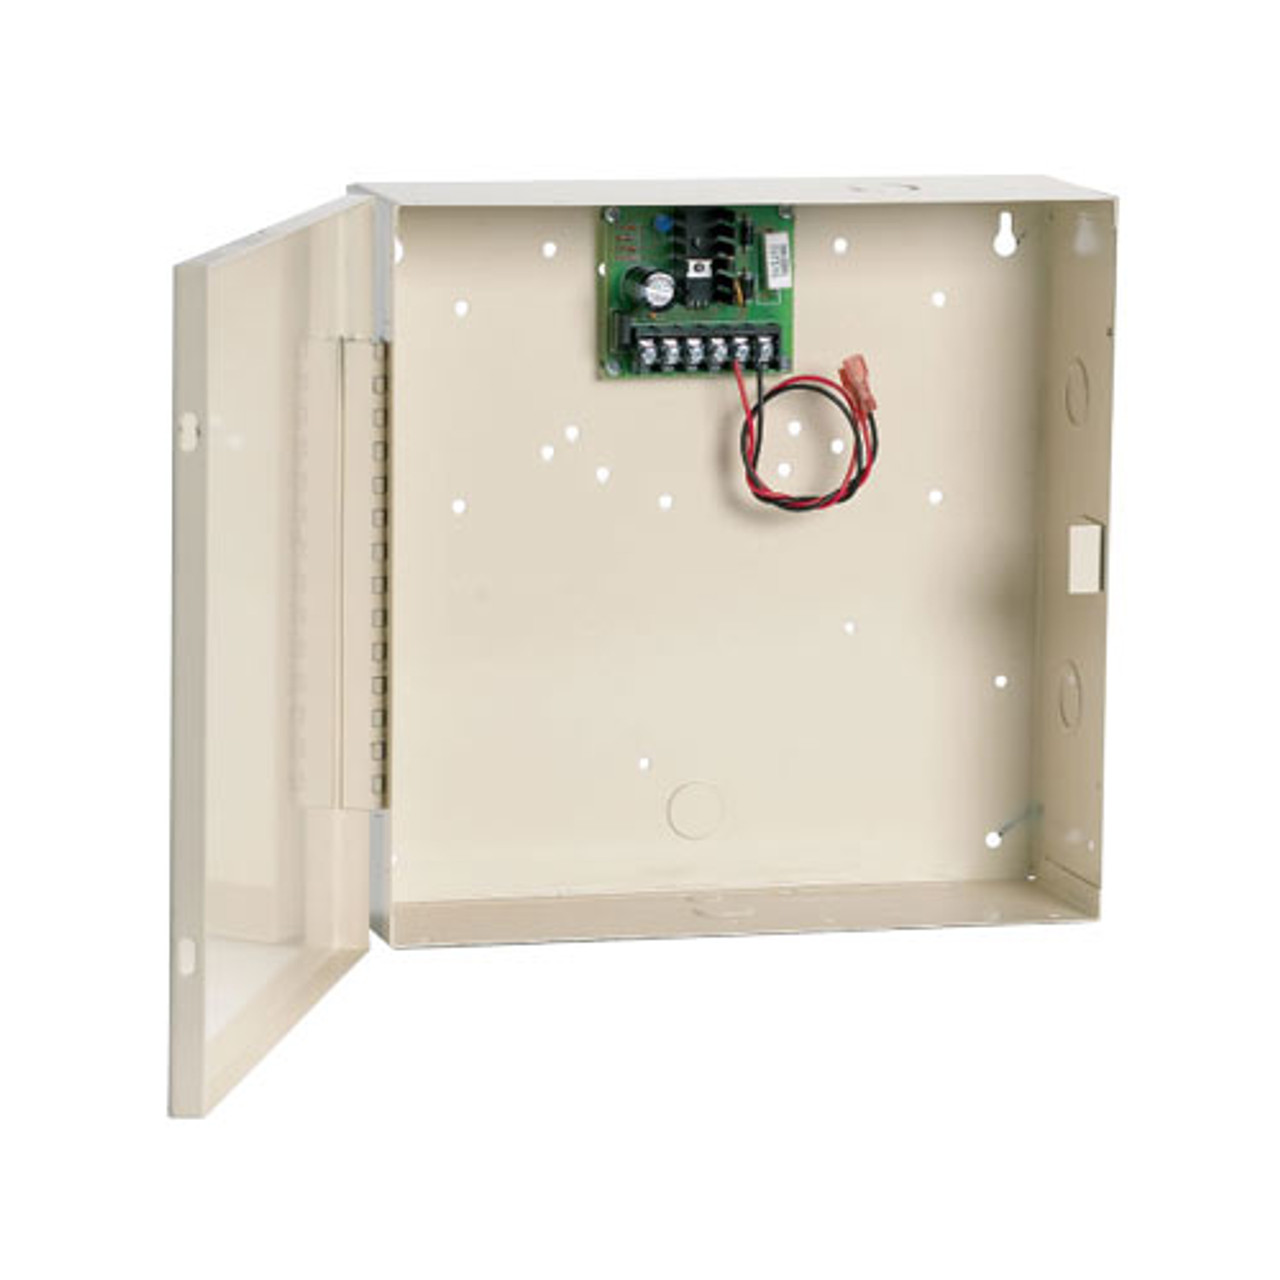 PG-1224-3-C IEI Access Control Power Supply in Cabinet